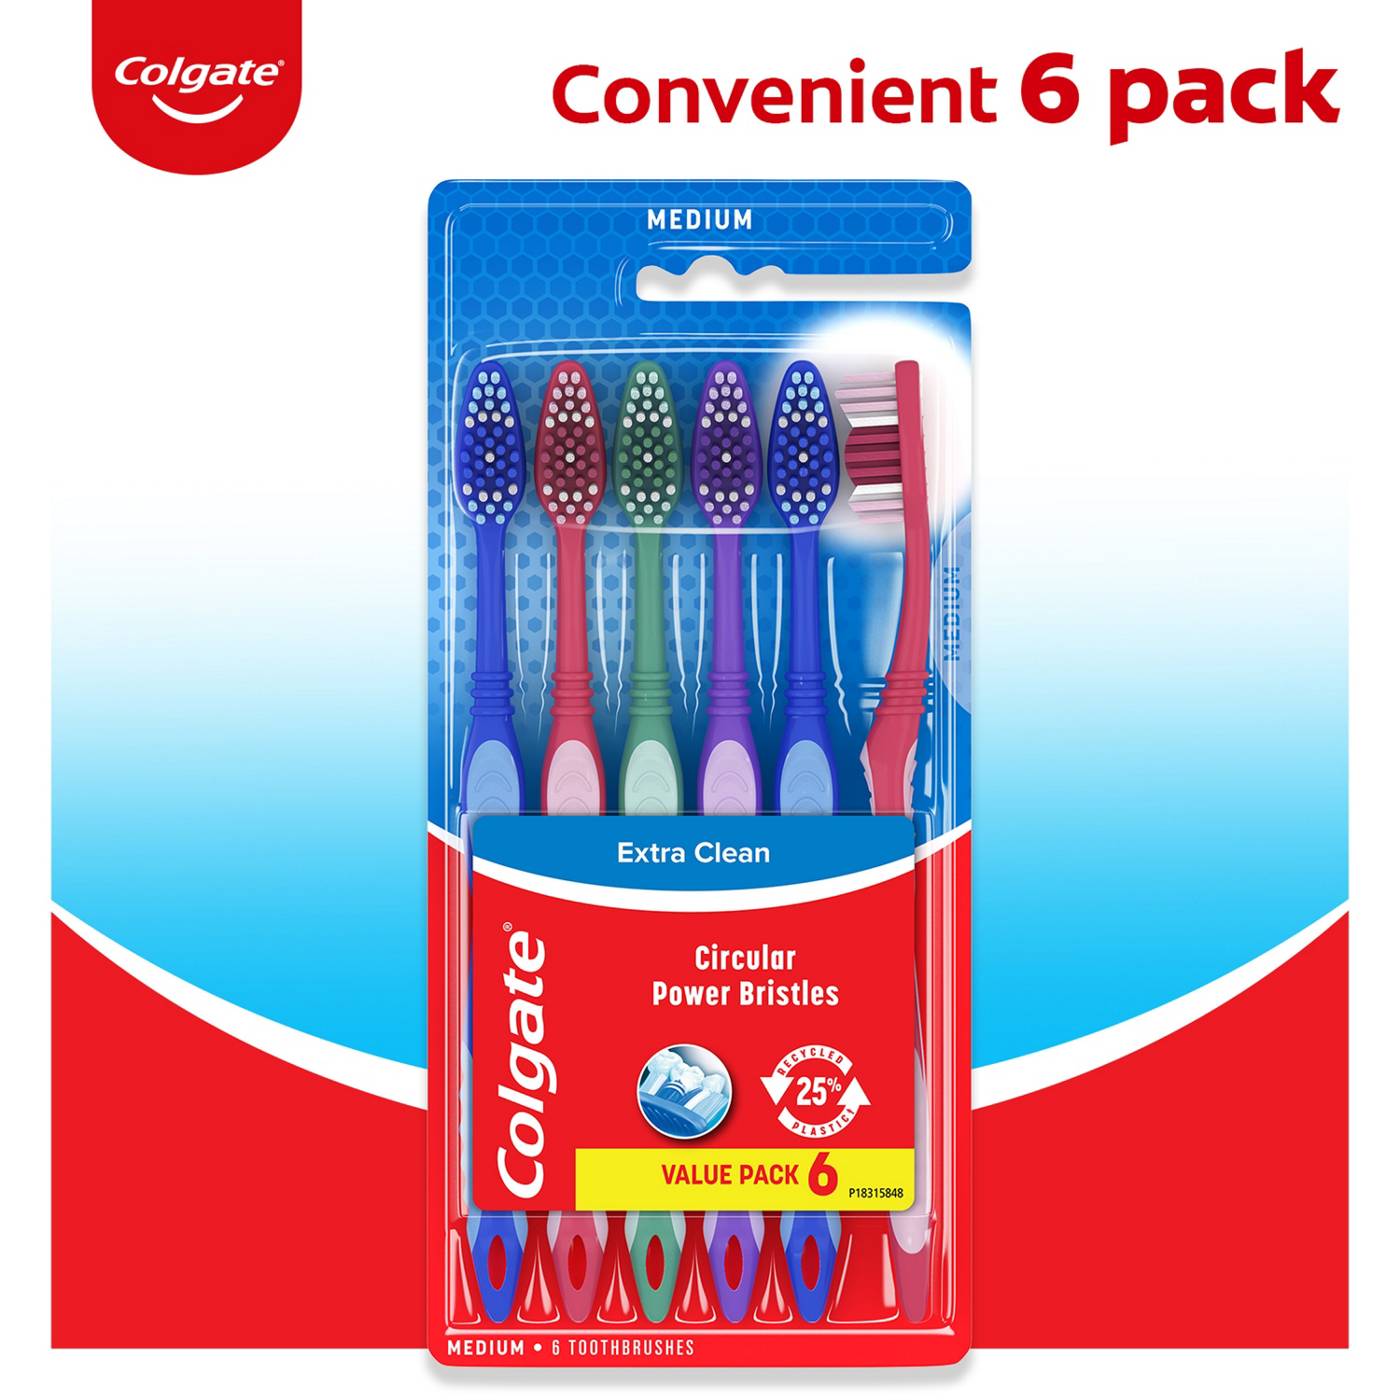 Colgate Extra Clean Toothbrushes - Medium; image 3 of 8